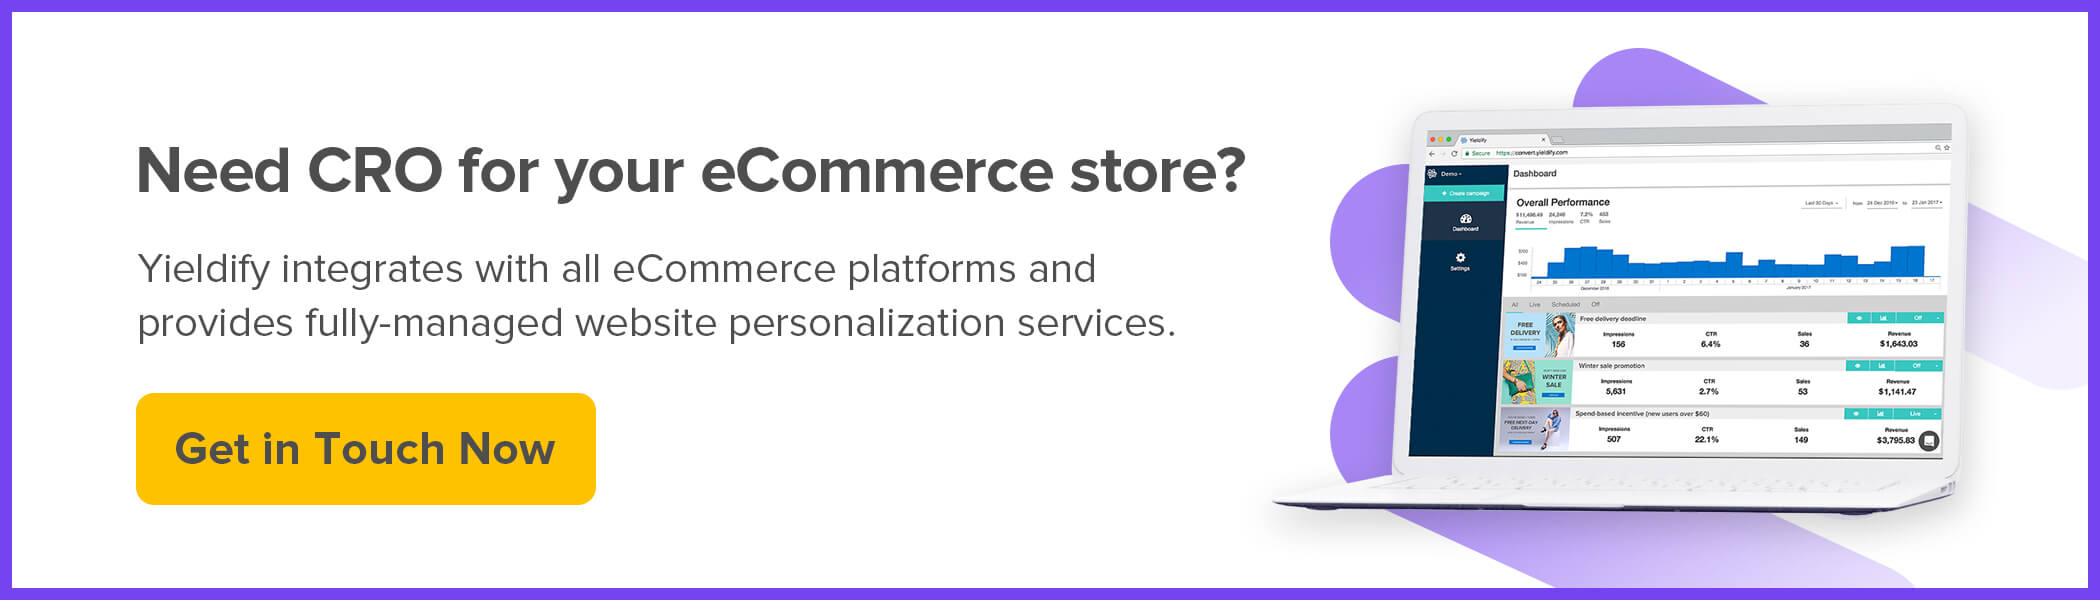 CRO for eCommerce stores - Get a Yieldify demo